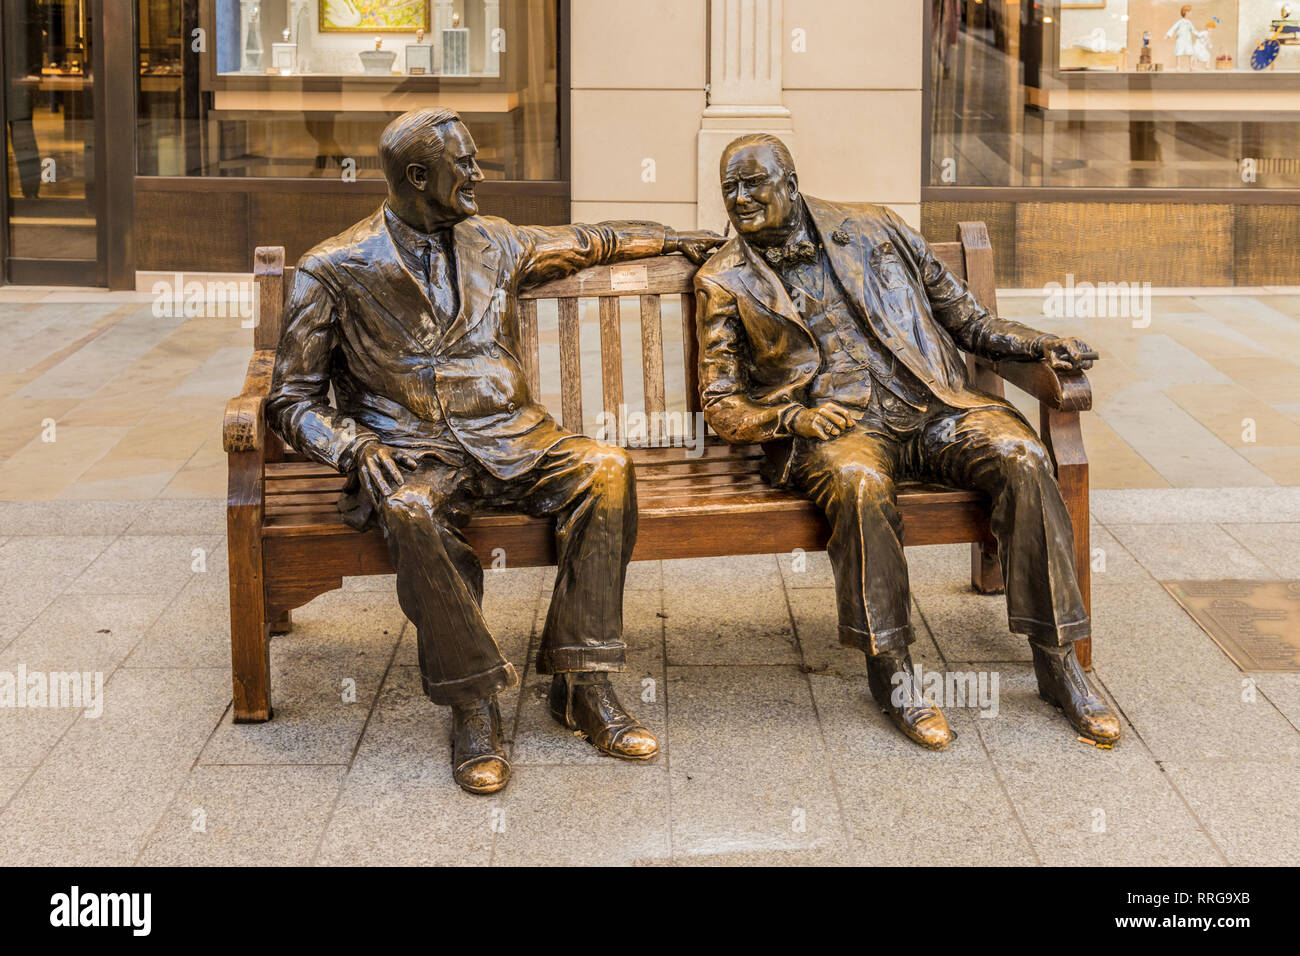 The Churchill And Roosevelt, Allies Sculpture, on New Bond Street, in Mayfair, London, England, United Kingdom, Europe Stock Photo